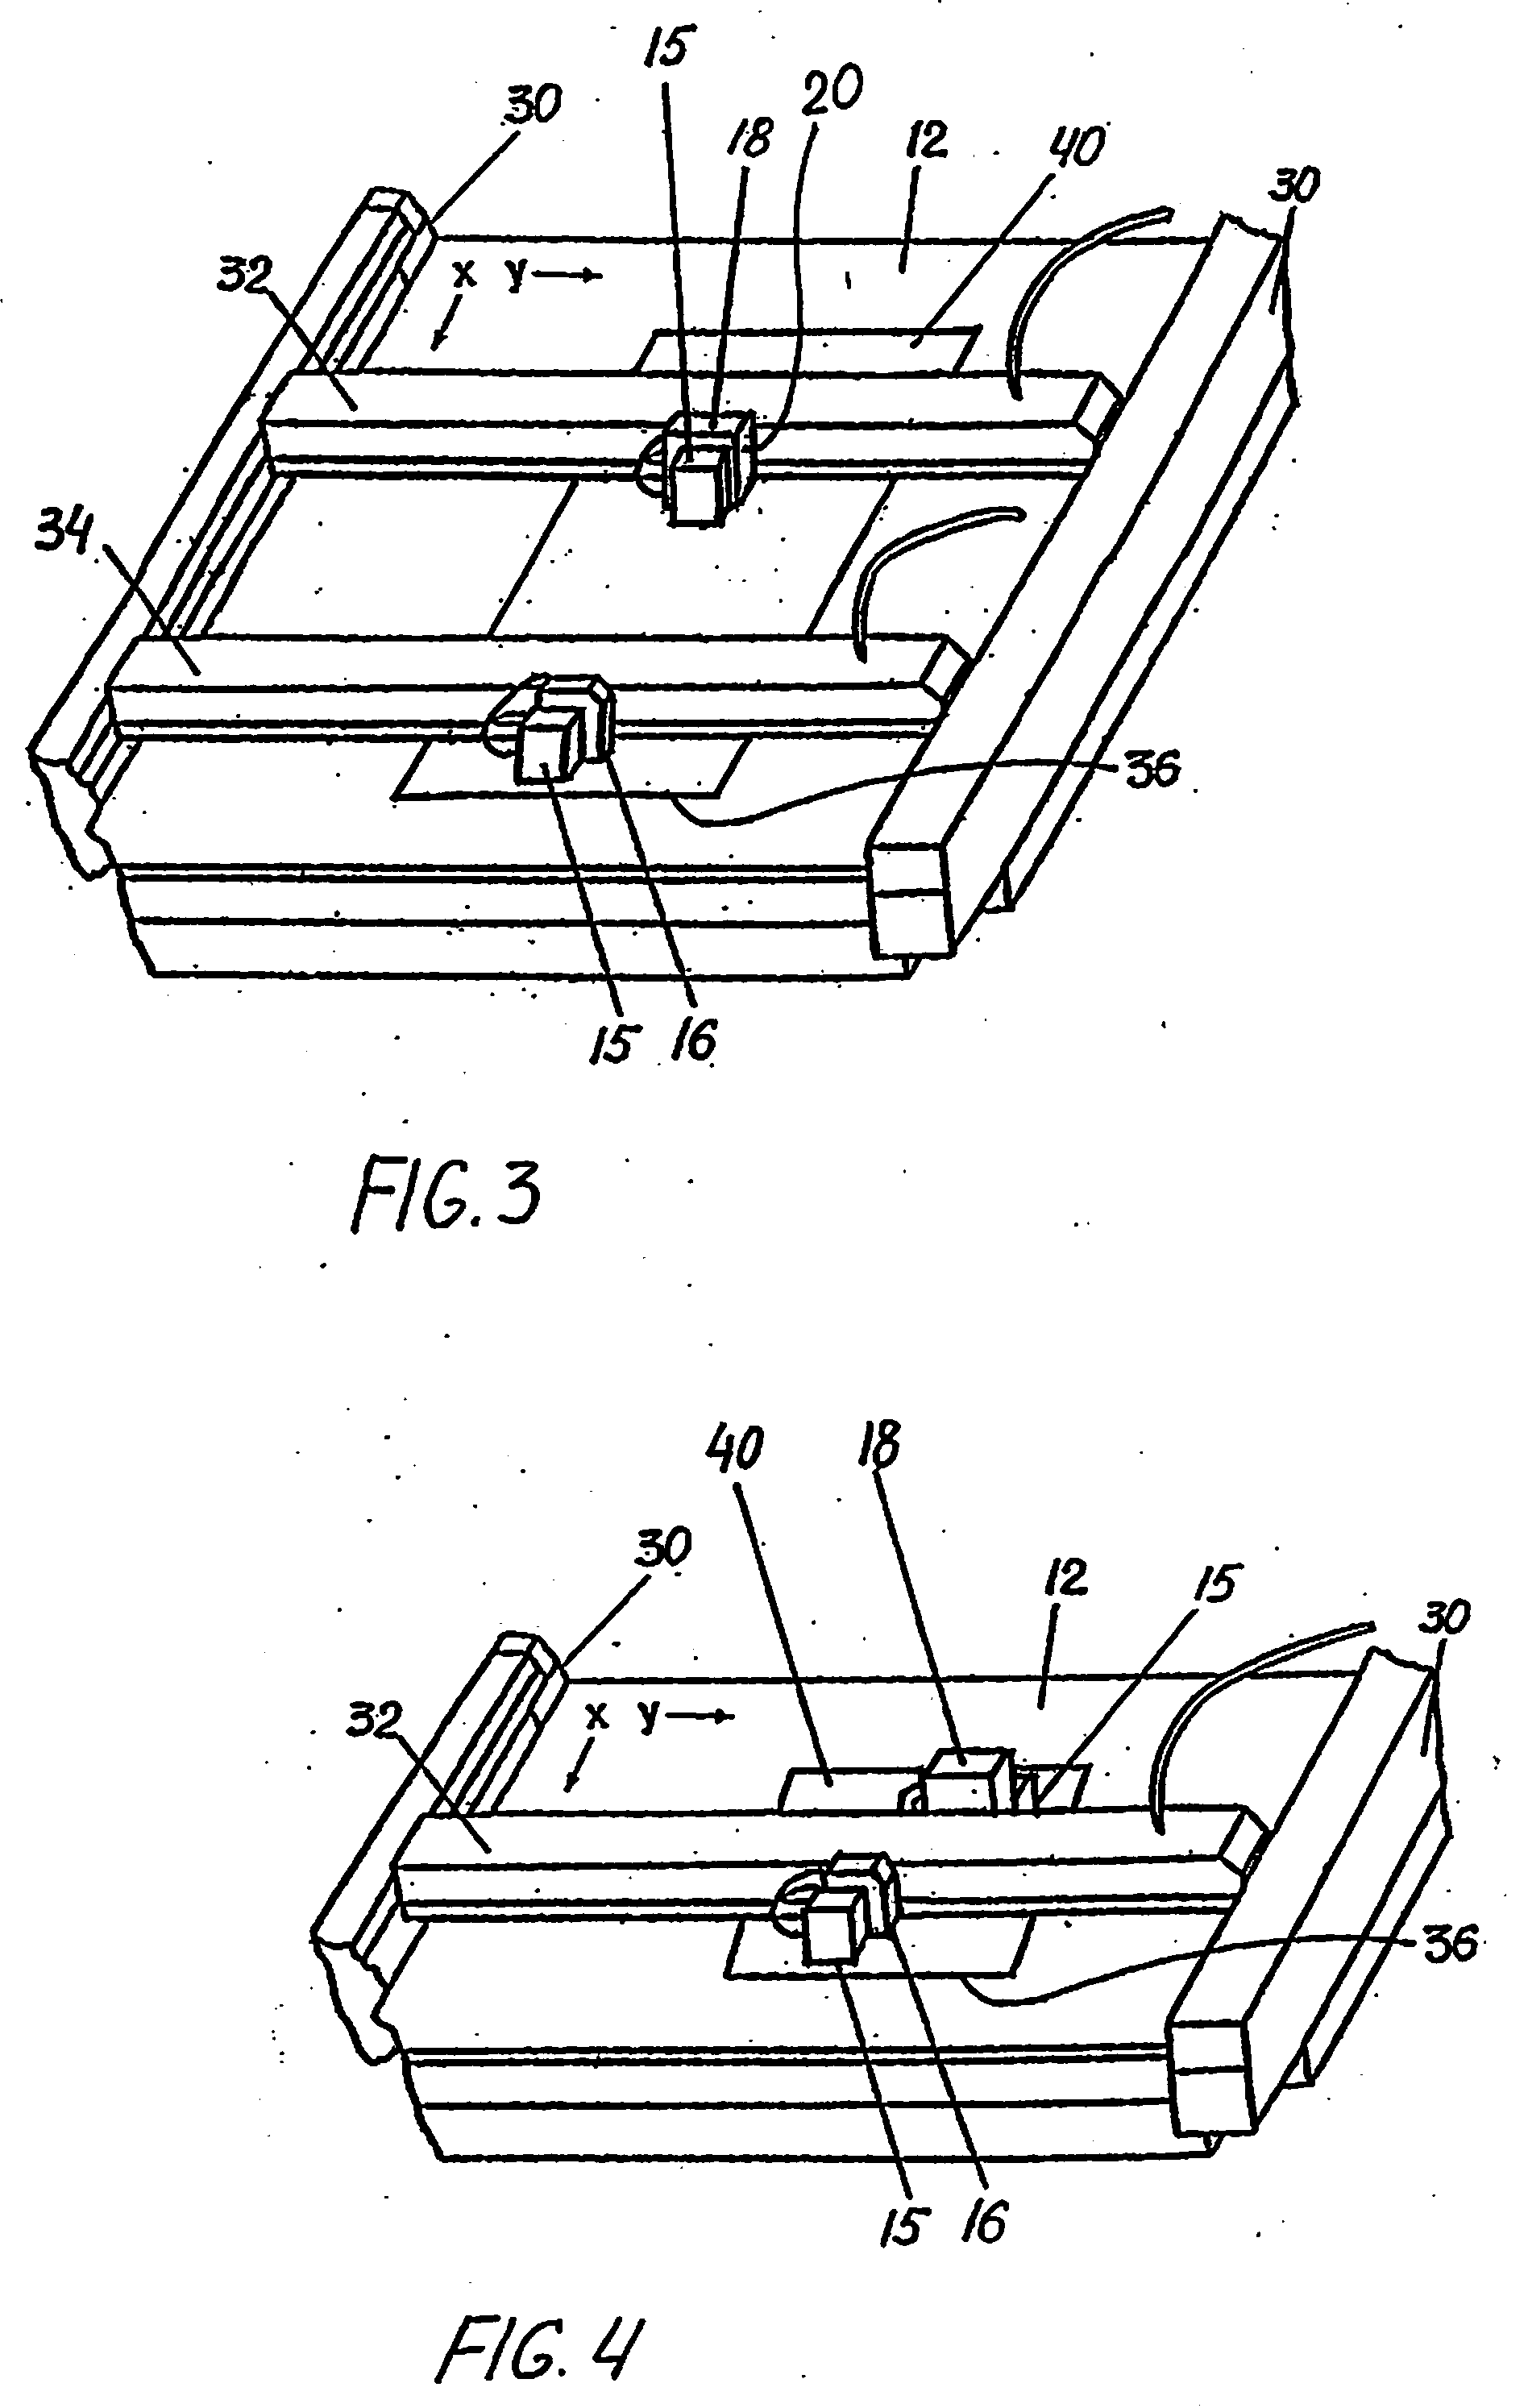 Method and Apparatus for Fray-Free Cutting with Laser Anti-Fray Inducement